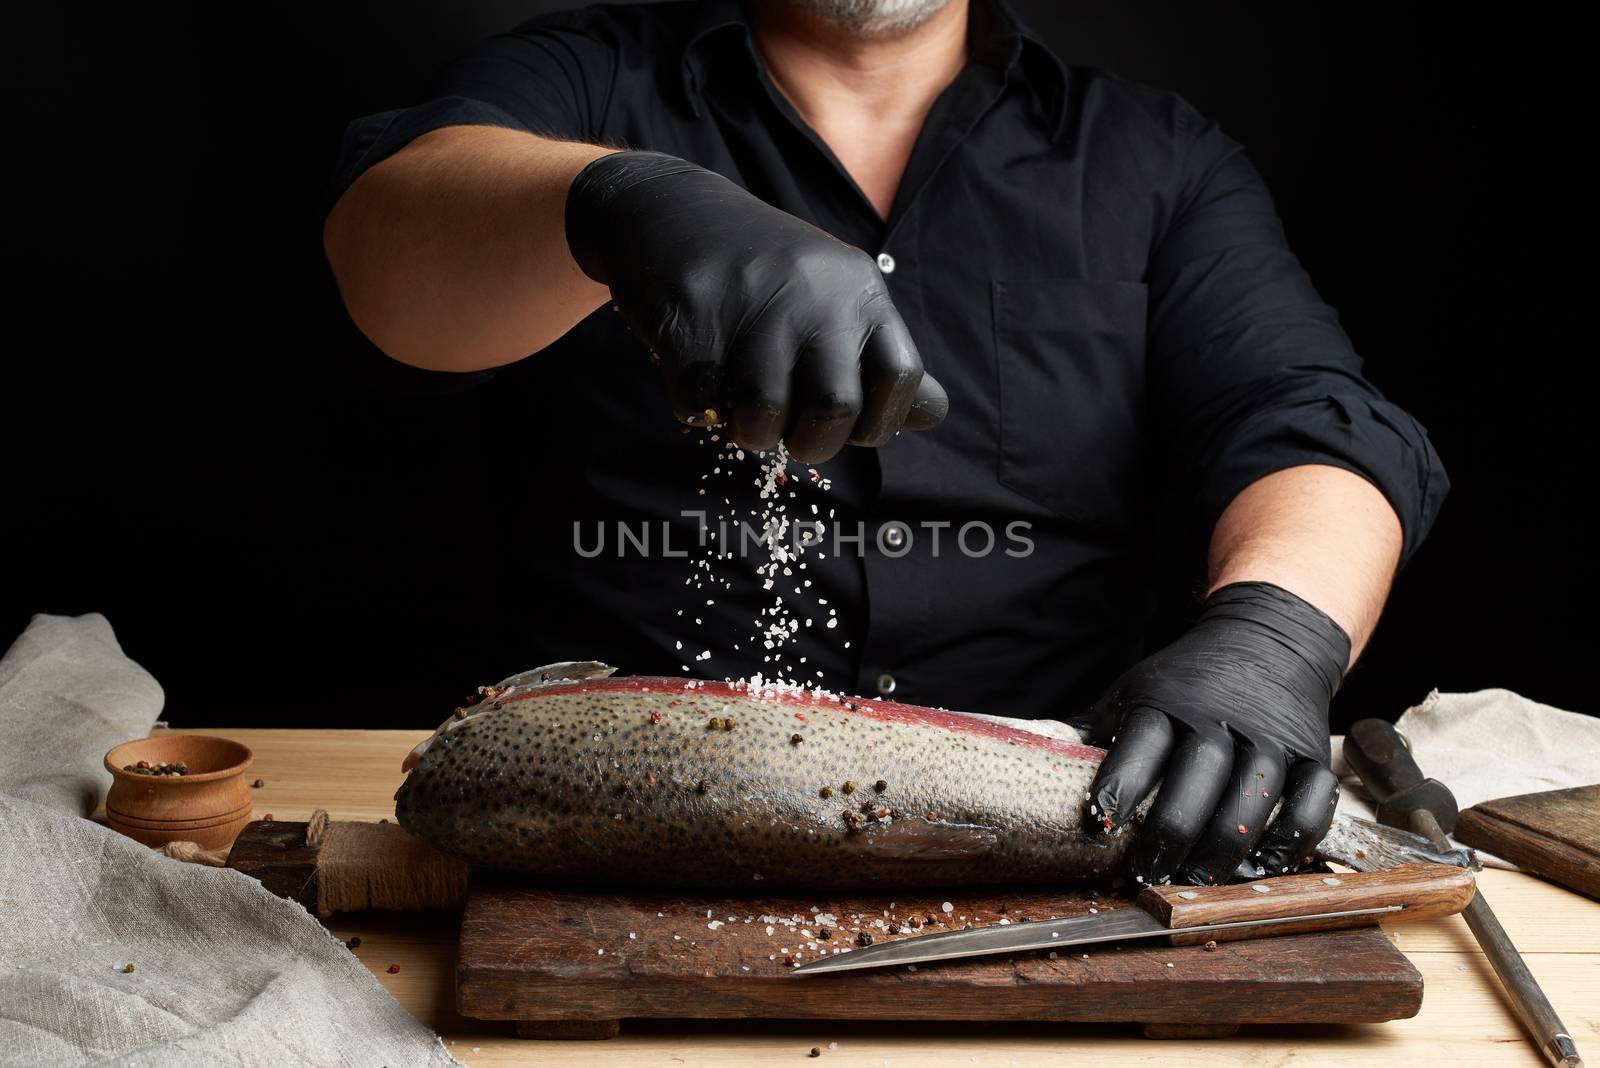 chef in a black shirt and black latex gloves prepares salmon fil by ndanko